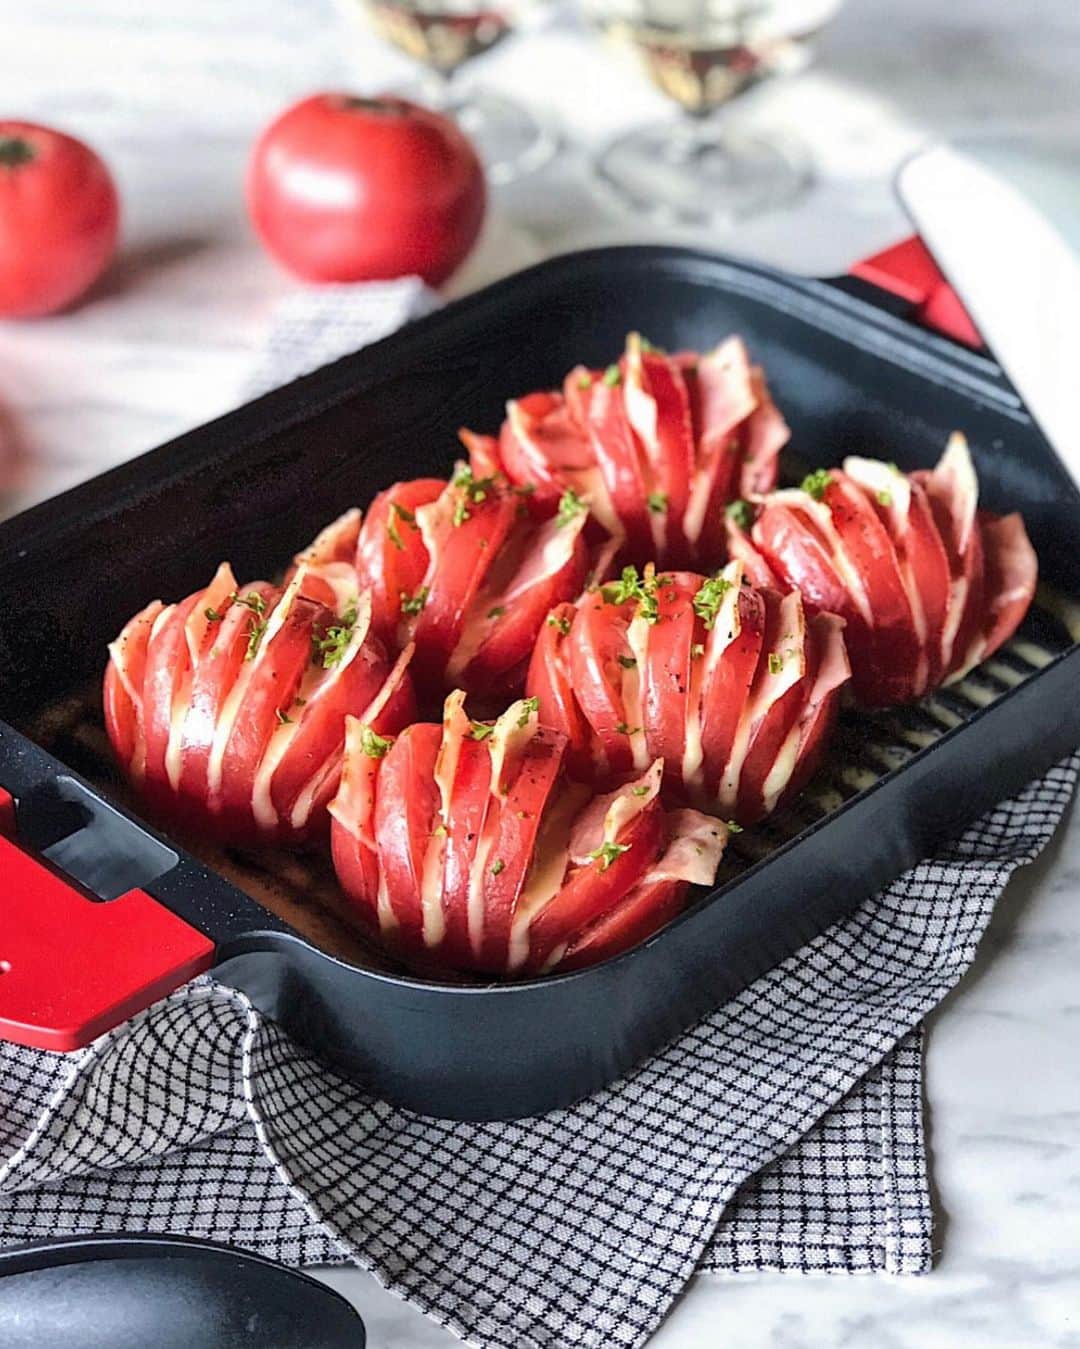 UchiCookのインスタグラム：「We have a delicious recipe for you just in time for Thanksgiving! 🍅 Hasselback Tomatoes on Steam Grill 🍅  This super easy recipe takes less than 20 minutes to make! ■ Ingredients 6 tomatoes 3 slices of bacon, cut into half 3 cheese slices, cut into half Italian parsley ⠀ Salt and black pepper⠀ Olive oil Pablo breadcrumbs ■ Steps 1. Make 5 or 6 cuts in each tomato (Be sure not to cut through the bottom). 2. Wedge bacon and cheese between each tomato slice. 3. Preheat Steam Grill over medium heat for about 3 minutes. 4. Put tomatoes on the Steam Grill.⠀ 5. Sprinkle salt and pepper. Then spread some olive oil and breadcrumbs. 6. Pour 1/3 cup water (2.7oz or 80cc) in the ridge surrounding the grill surface and steam-grill for about 10 minutes with the lid on. 7. Lastly, sprinkle parsley to serve. 8. Enjoy your meal 😋  HAPPY THANKSGIVING 🦃🍁 - - - - #uchicook #steamgrill #tomato #tomatoaddict #🍅 #kitchentools #healthylife #easyrecipes #hasselback #quickmeals #fooddeco #hasselbacktomatoes #lifestyleblogger #tomatorecipes #foodporn #kitchengoals #kitchendeco #yummy #healthy #healthyrecipes」